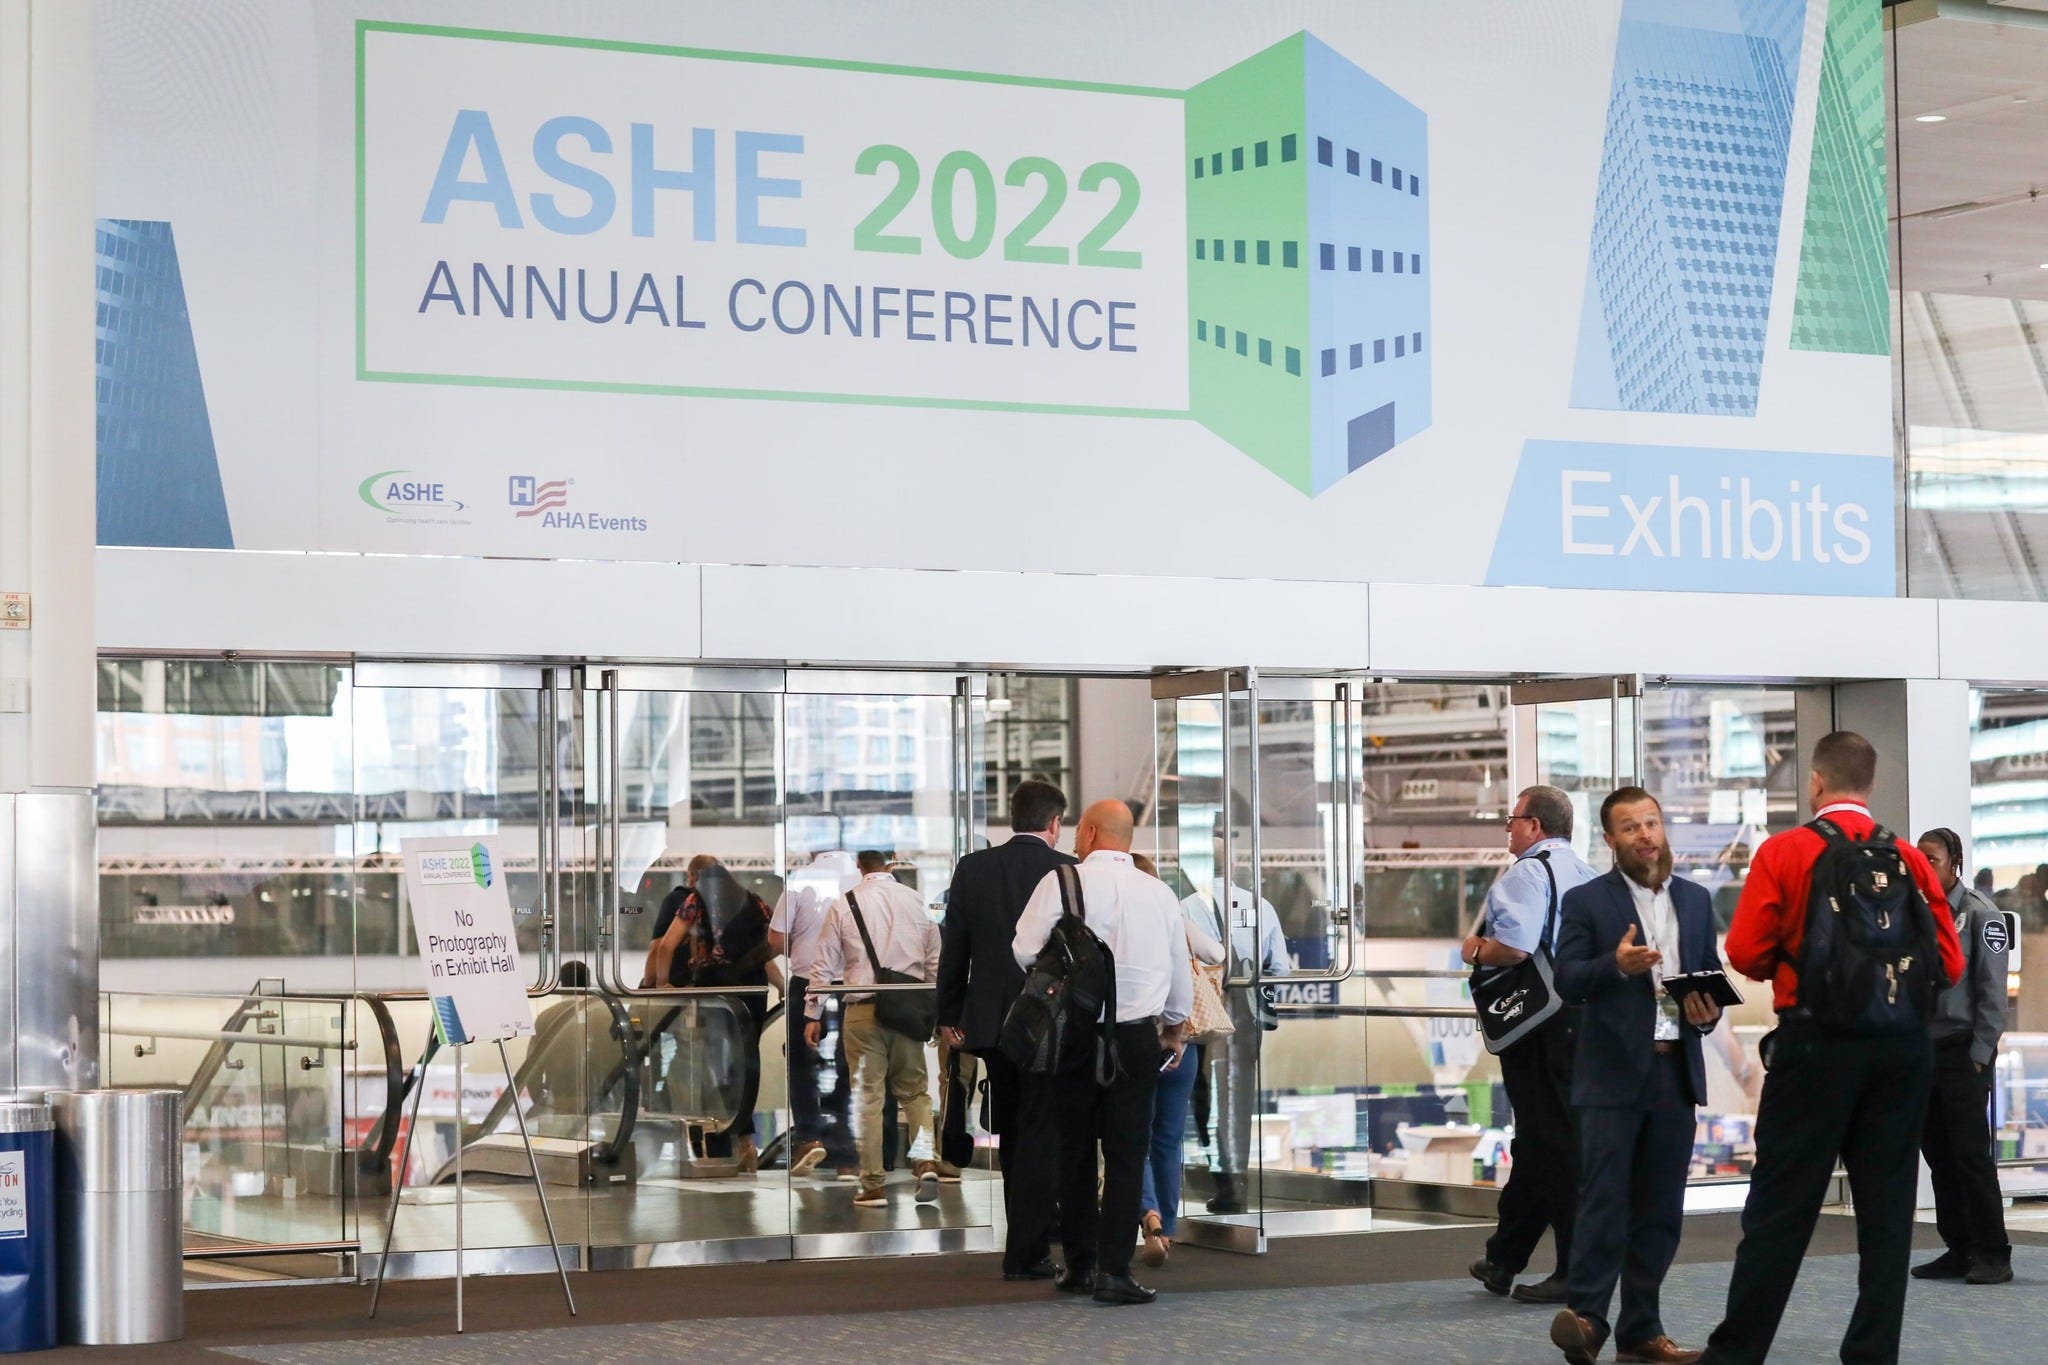 ASHE Annual Conference Events Reach Health Care Facility Management